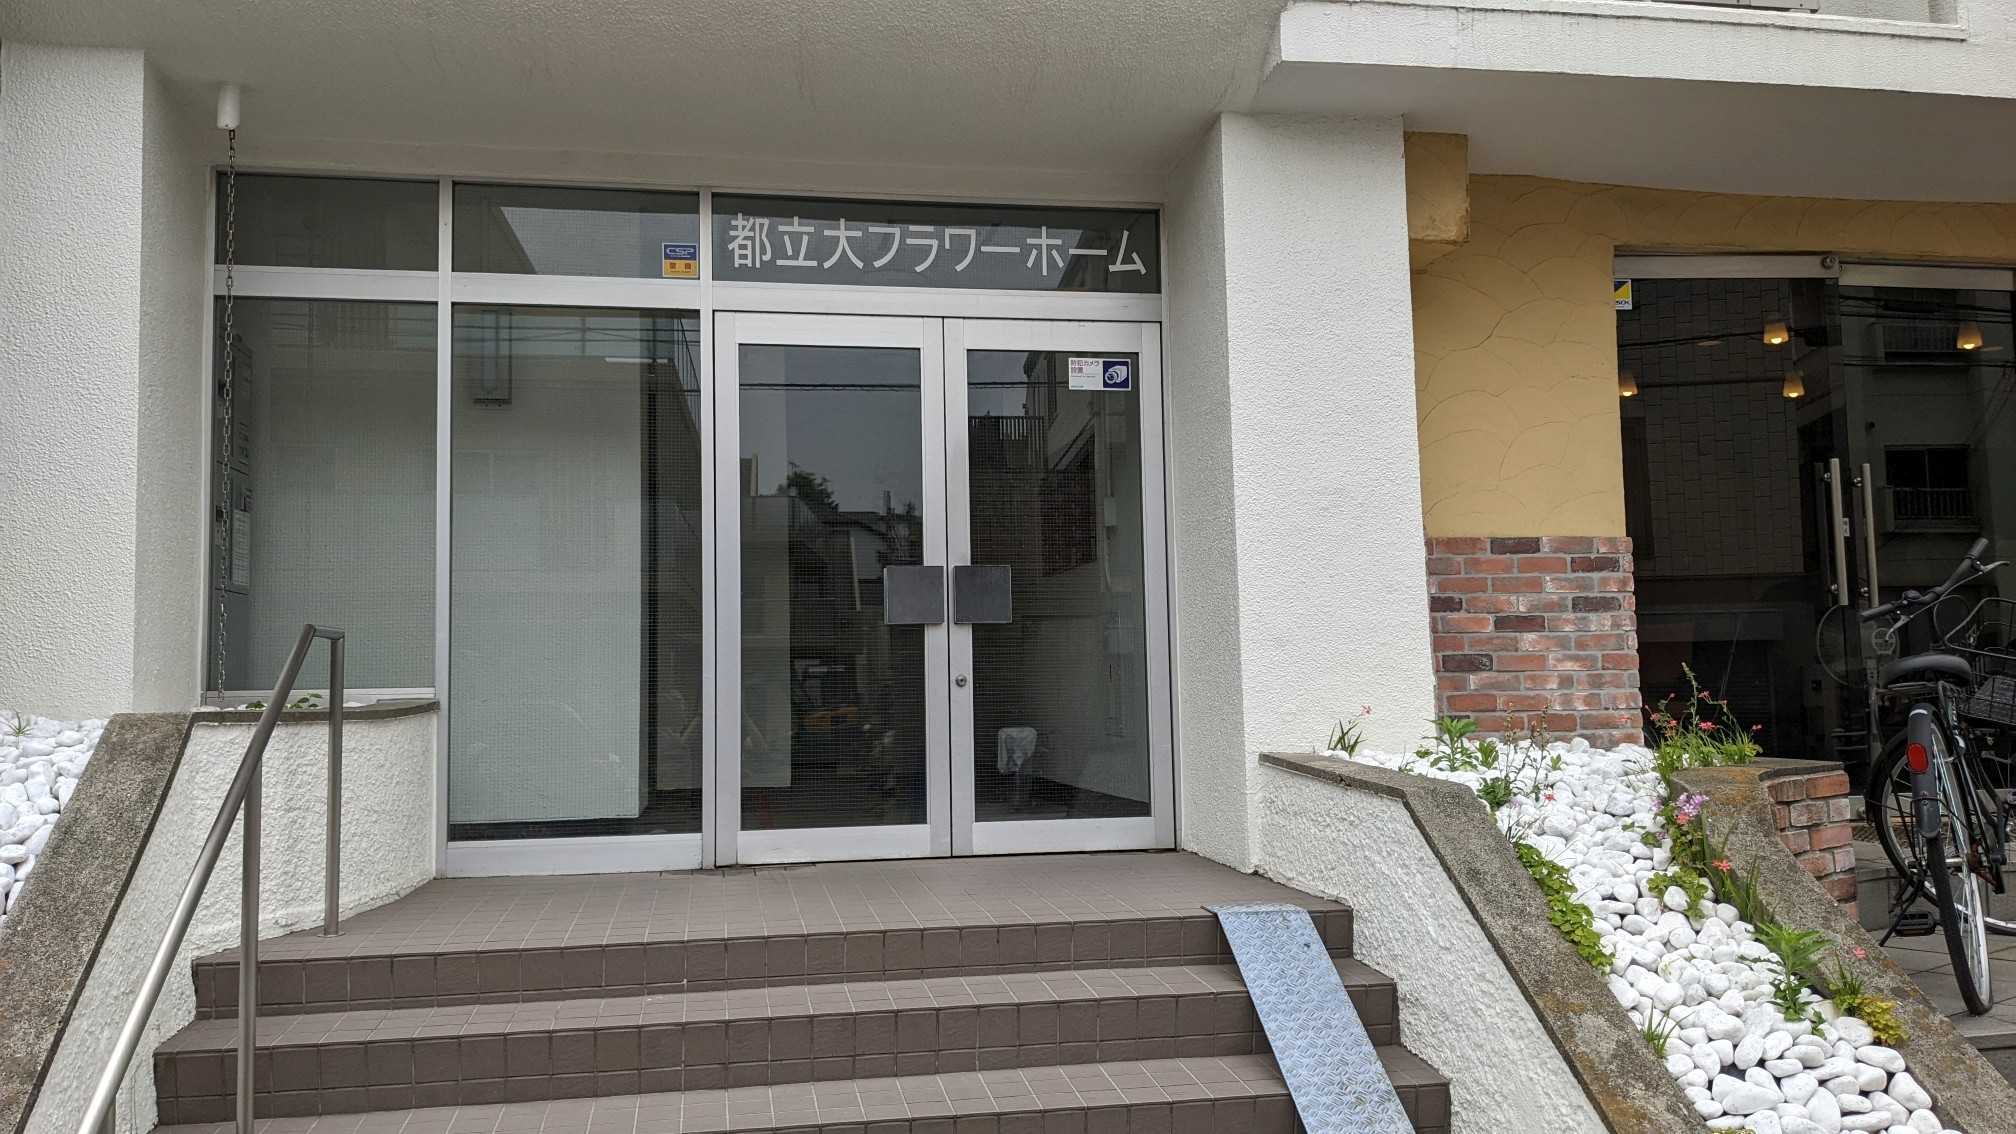 The entrance of Makoto's apartmnet building, a doorway at the top of some steps.